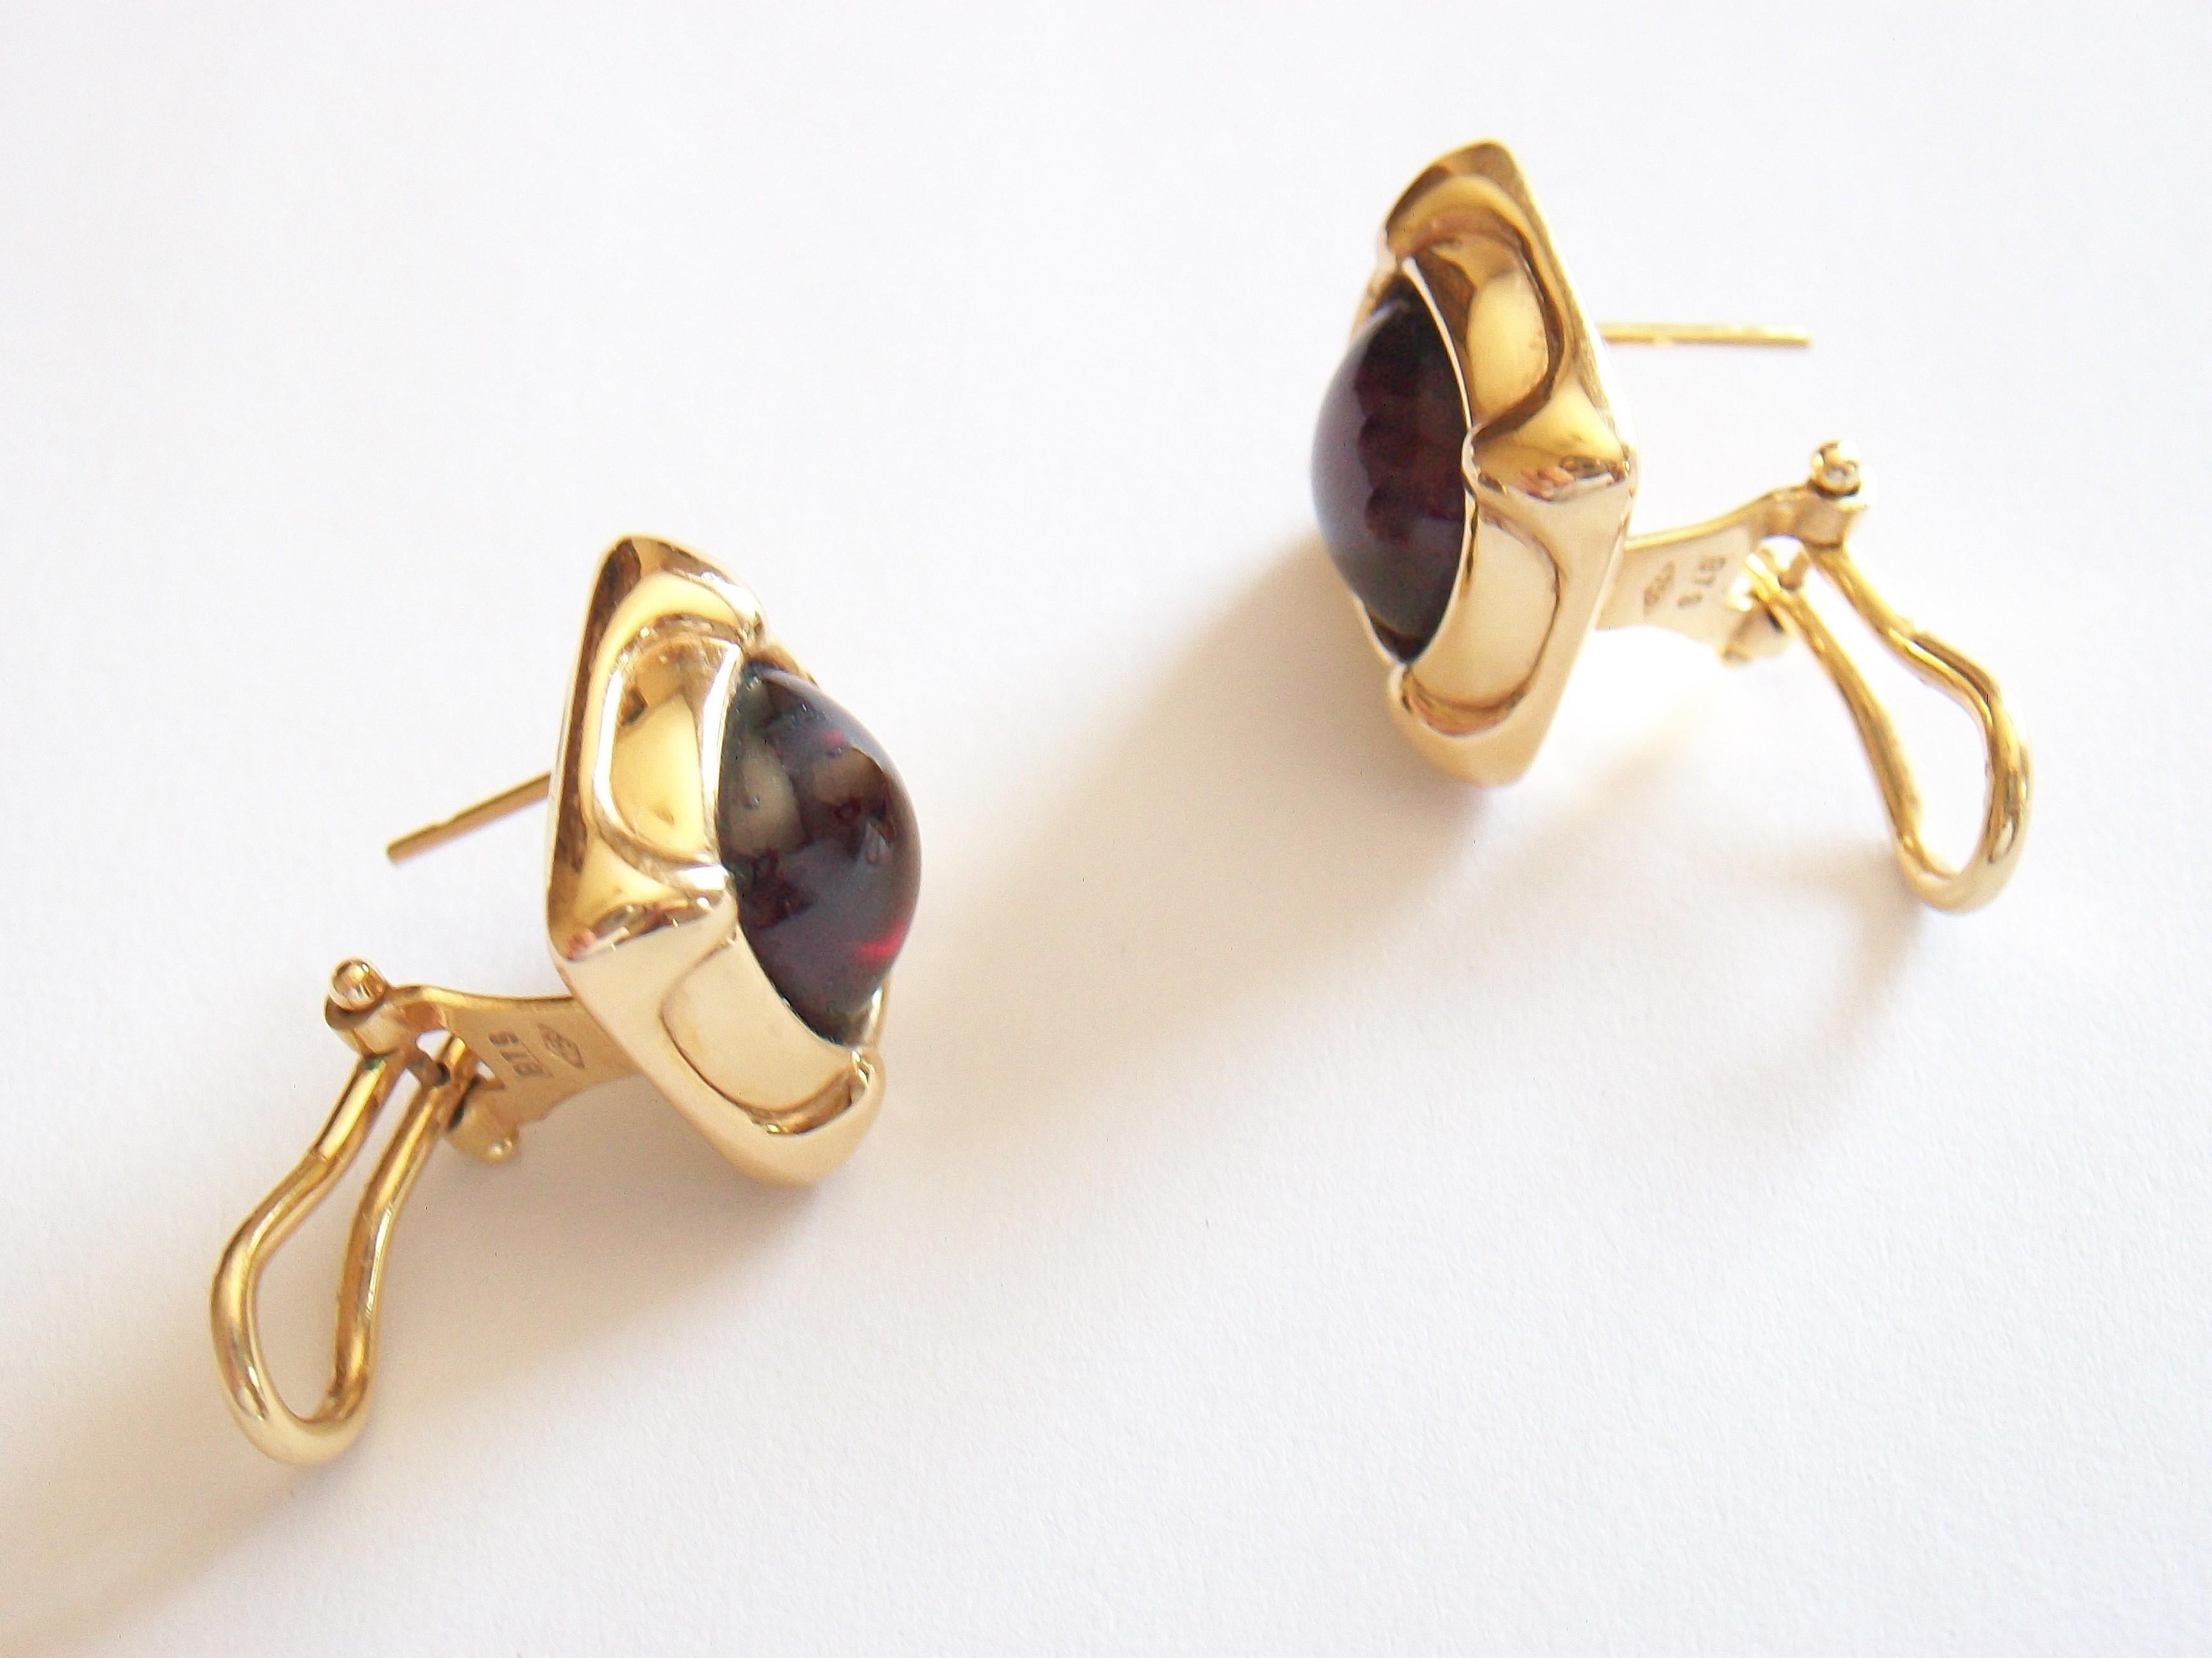 Vintage 18K Gold & Cabochon Garnet Earrings, Omega Backs, Mid-20th Century In Good Condition For Sale In Chatham, CA